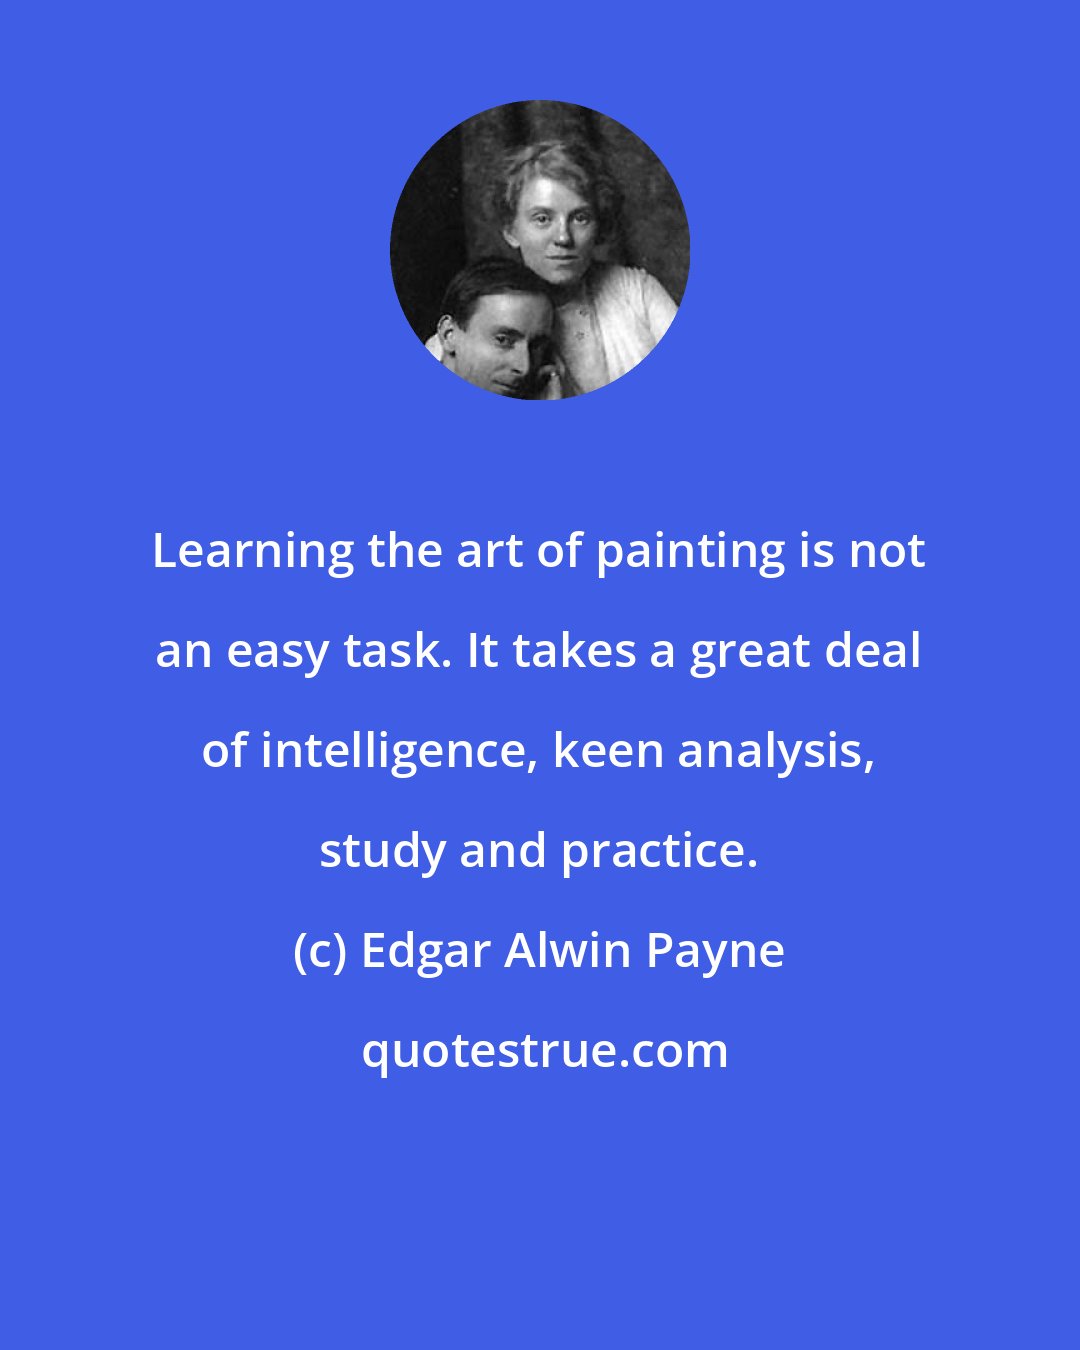 Edgar Alwin Payne: Learning the art of painting is not an easy task. It takes a great deal of intelligence, keen analysis, study and practice.